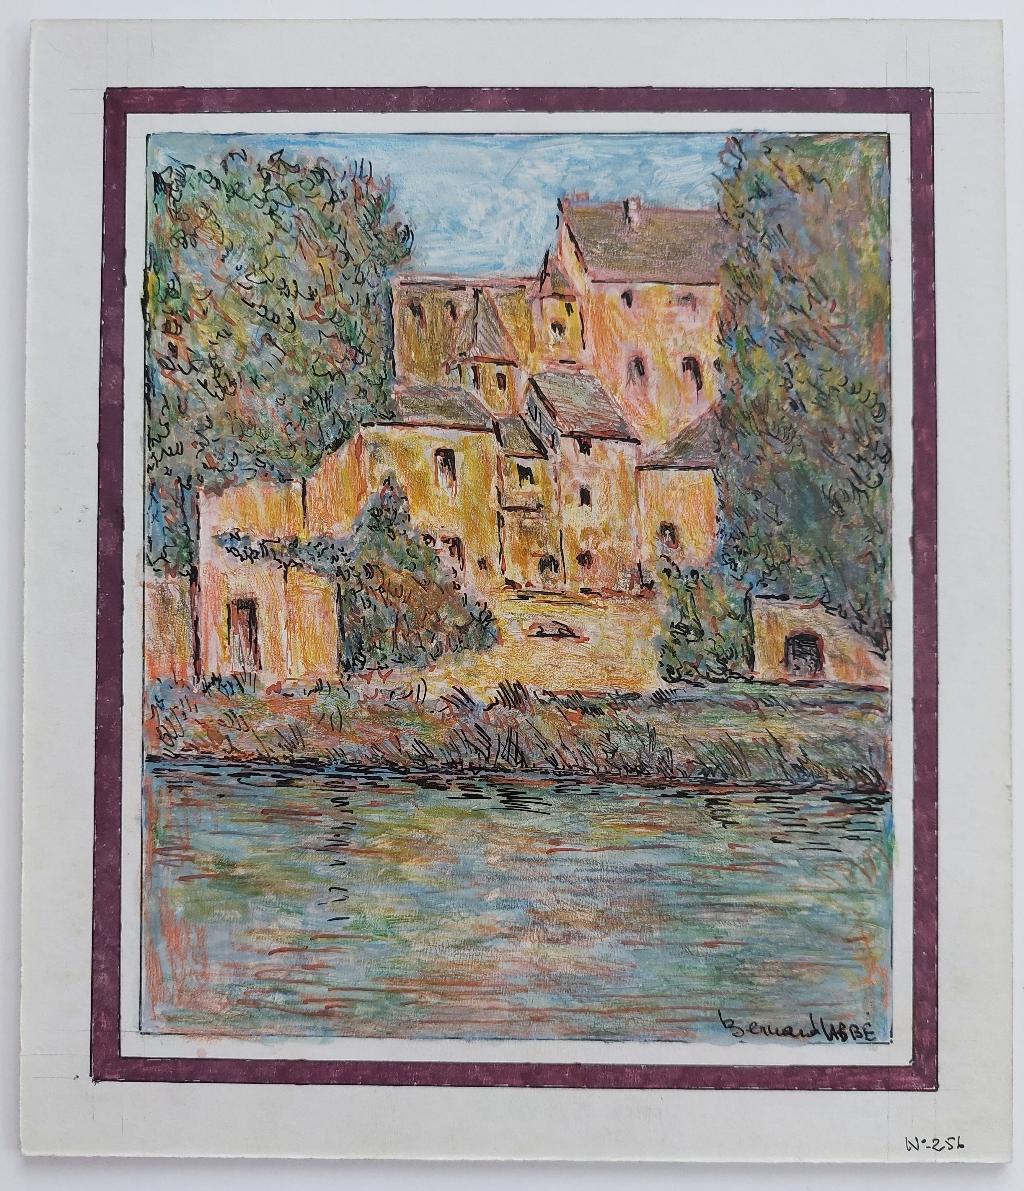 Watercolor and ink French town buildings over a River
by Bernard Labbe (French mid 20th century)
original watercolor and ink on card
image size: 7.5 x 6 inches
card overall: 9.4 x 8.1 inches
signed , stamped verso
condition: very good and